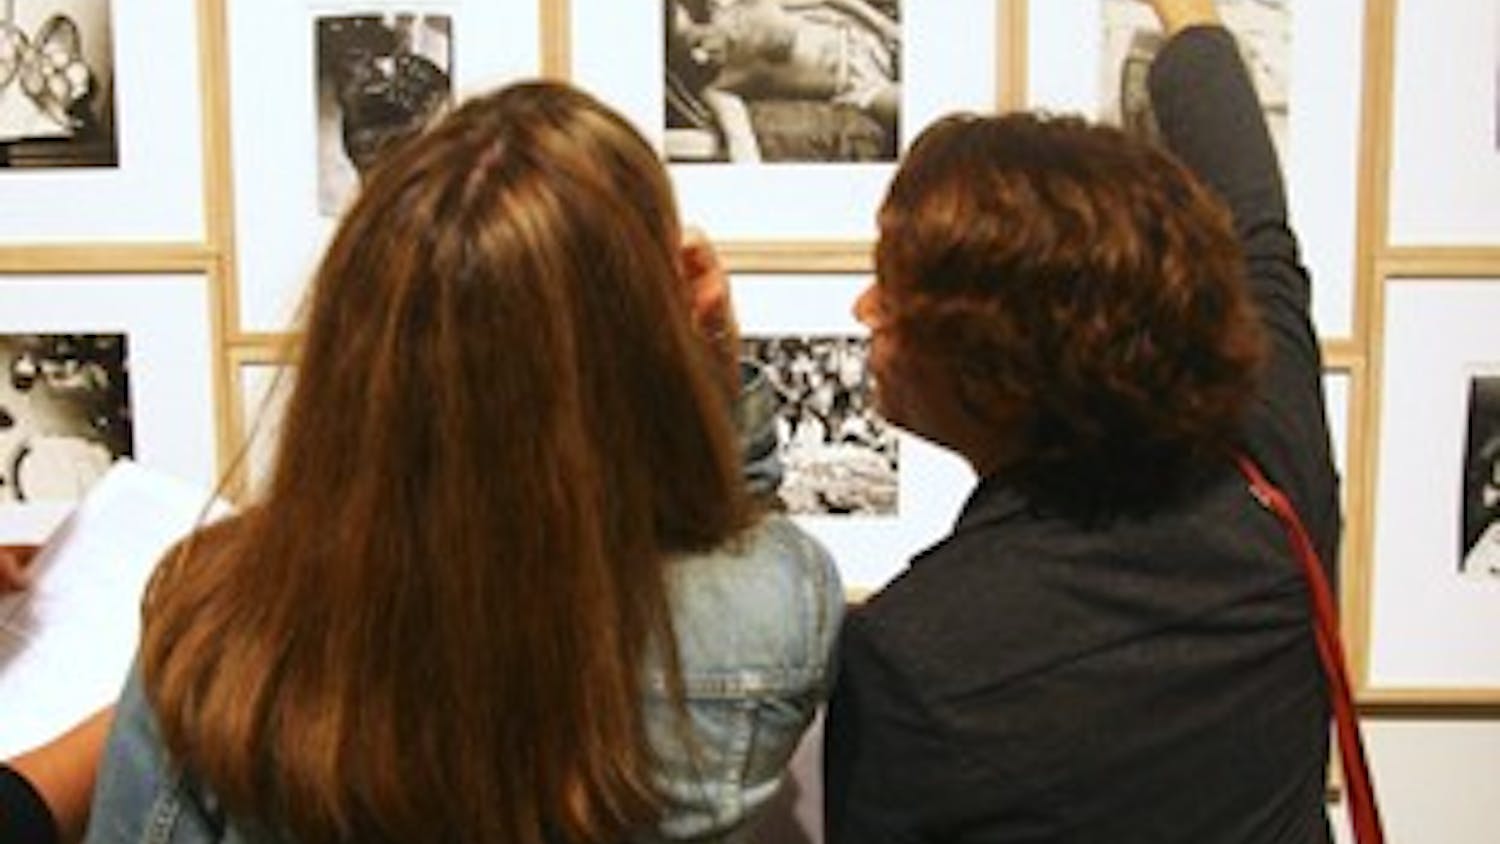 Lena Wegner (right) examines the Andy Warhol photo exhibit at the Ackland Art Museum with Lisa Voss (left) on Thursday night.